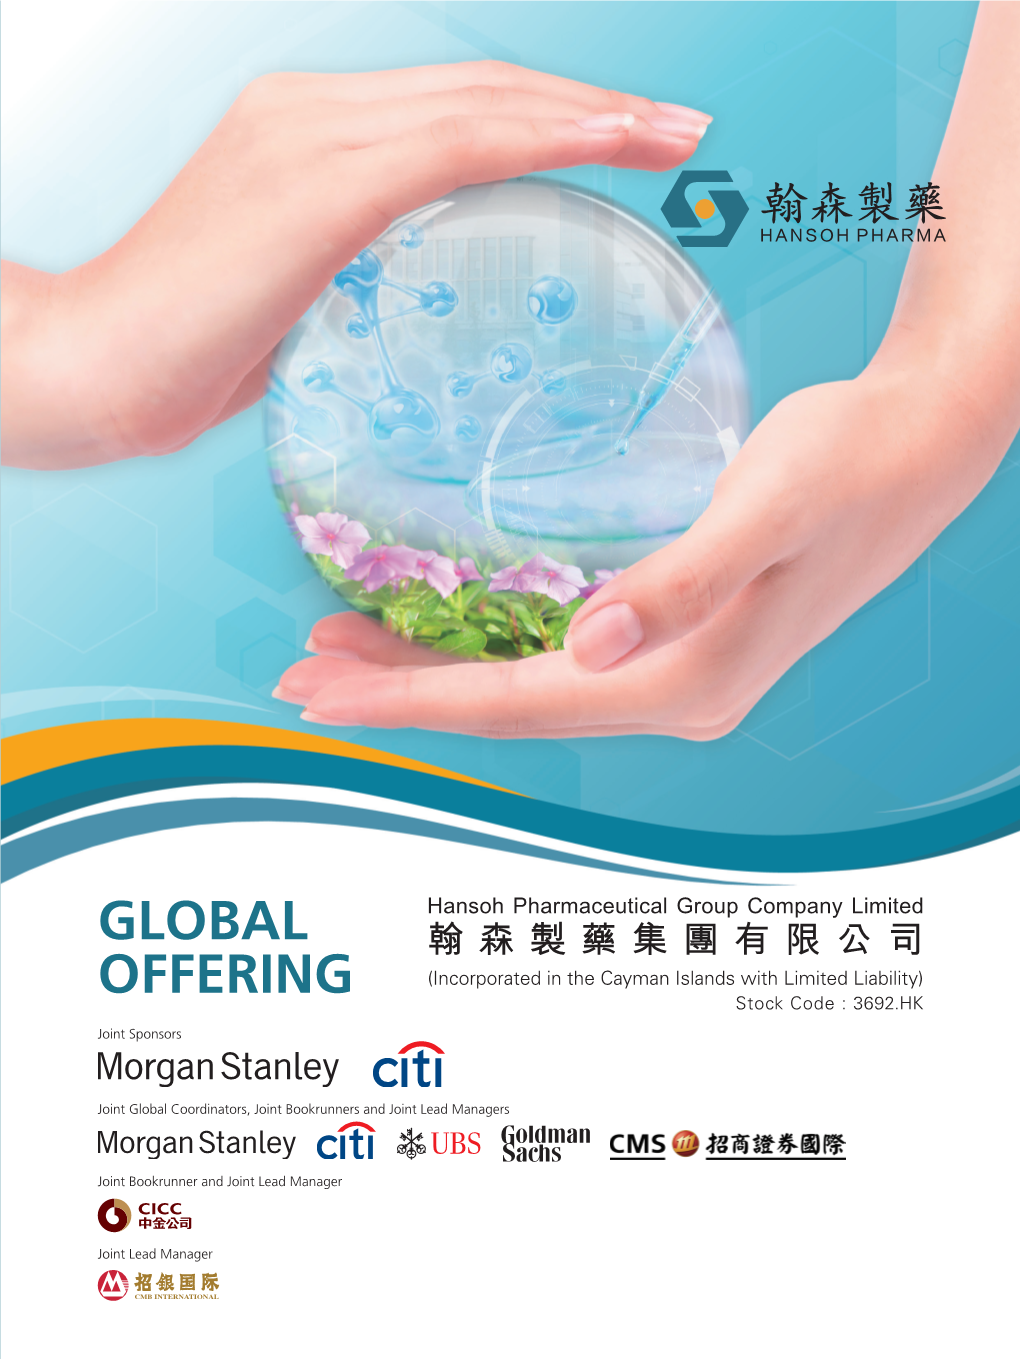 GLOBAL OFFERING (Incorporated in the Cayman Islands with Limited Liability)